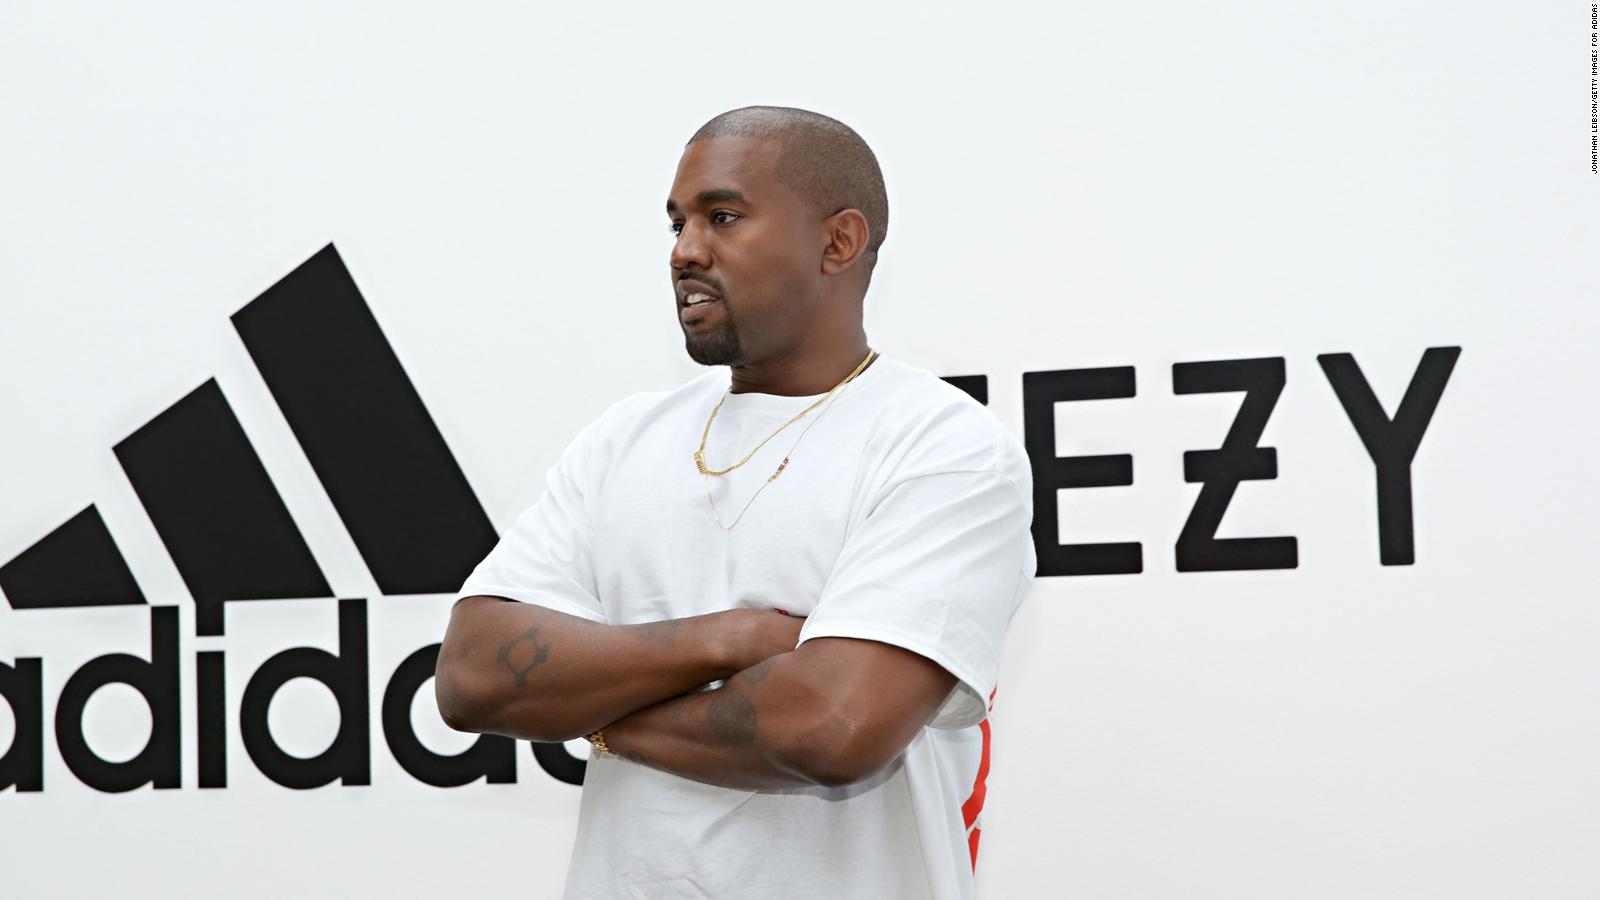 Adidas says dropping Kanye West could cost it more than $1 billion in sales - CNN